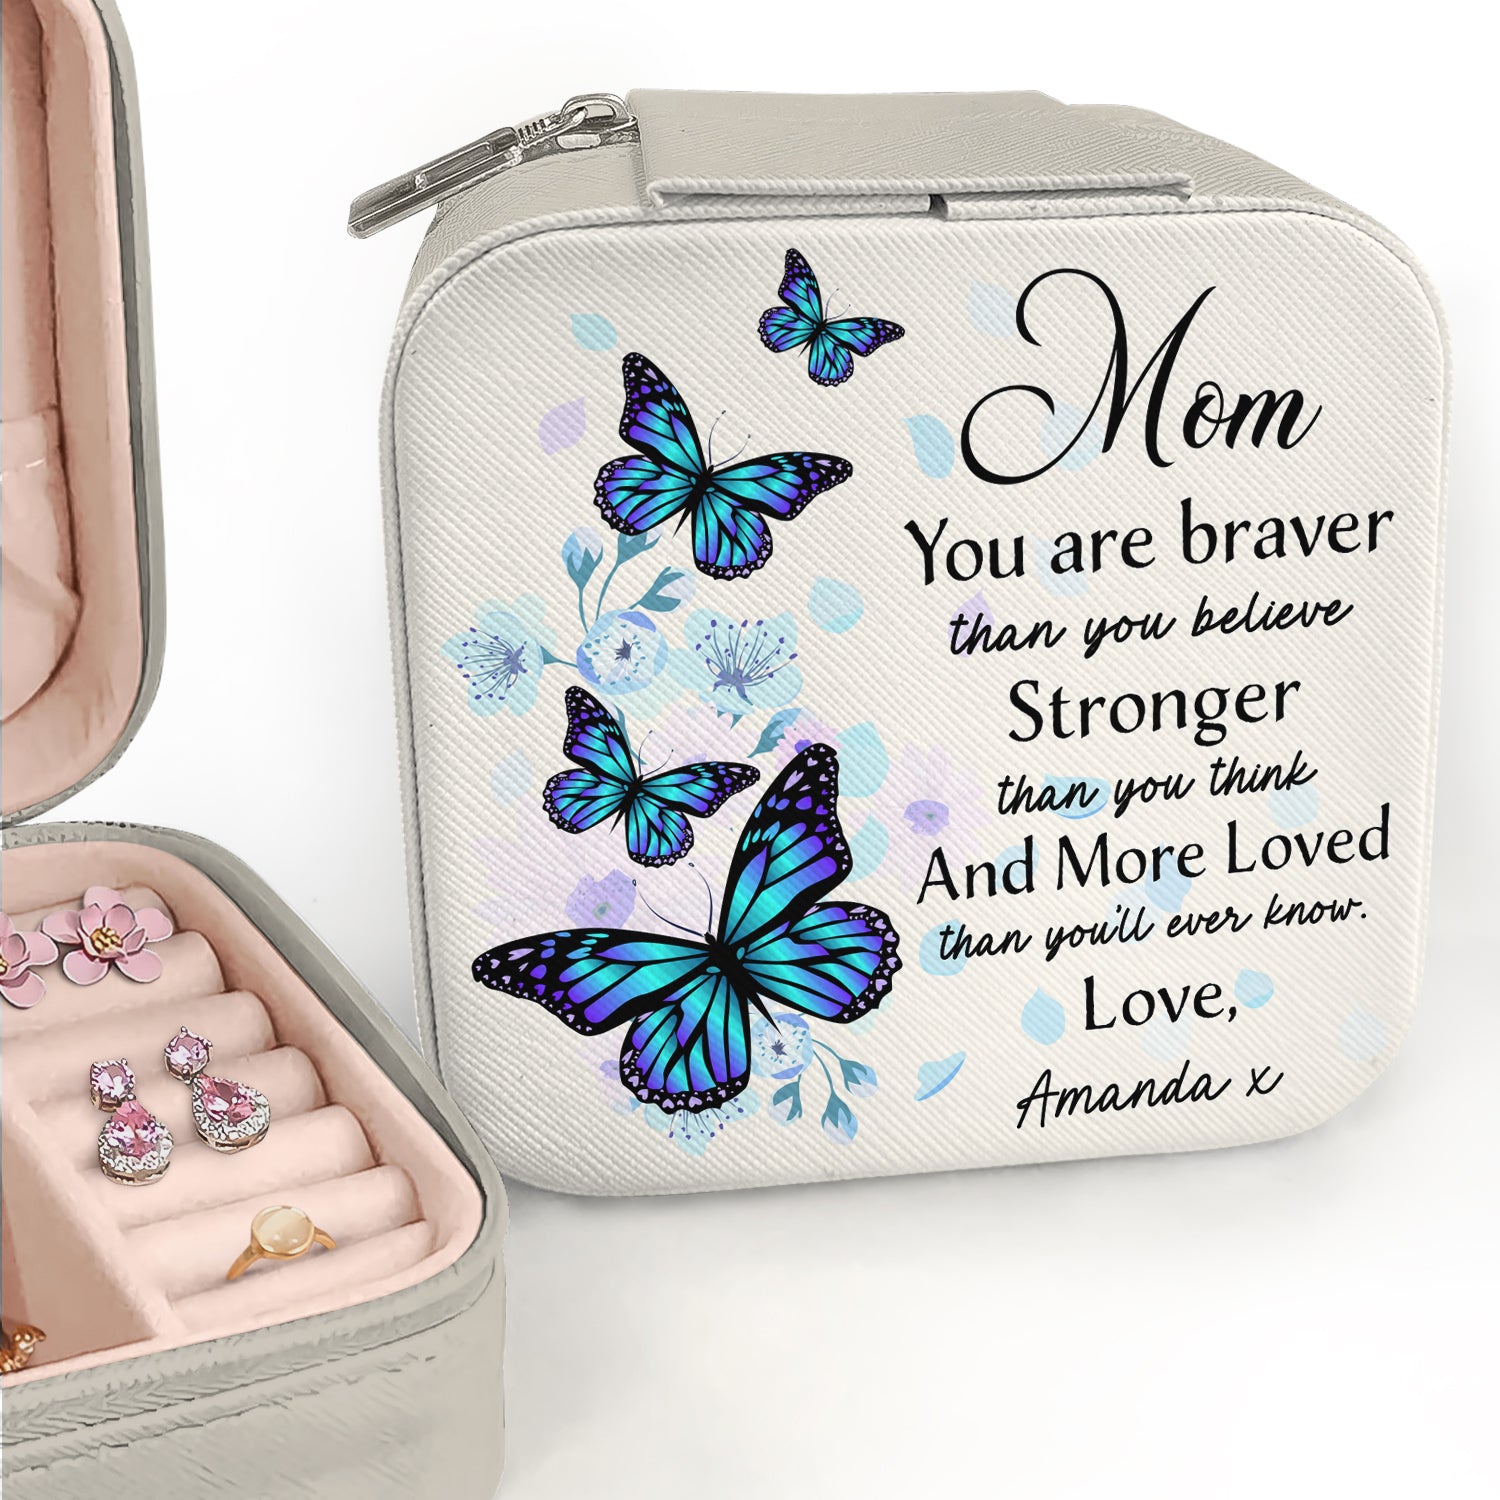 Mom You Are Braver Than You Believe - Birthday, Loving Gift For Mom, Mother, Grandma, Nana - Personalized Jewelry Box